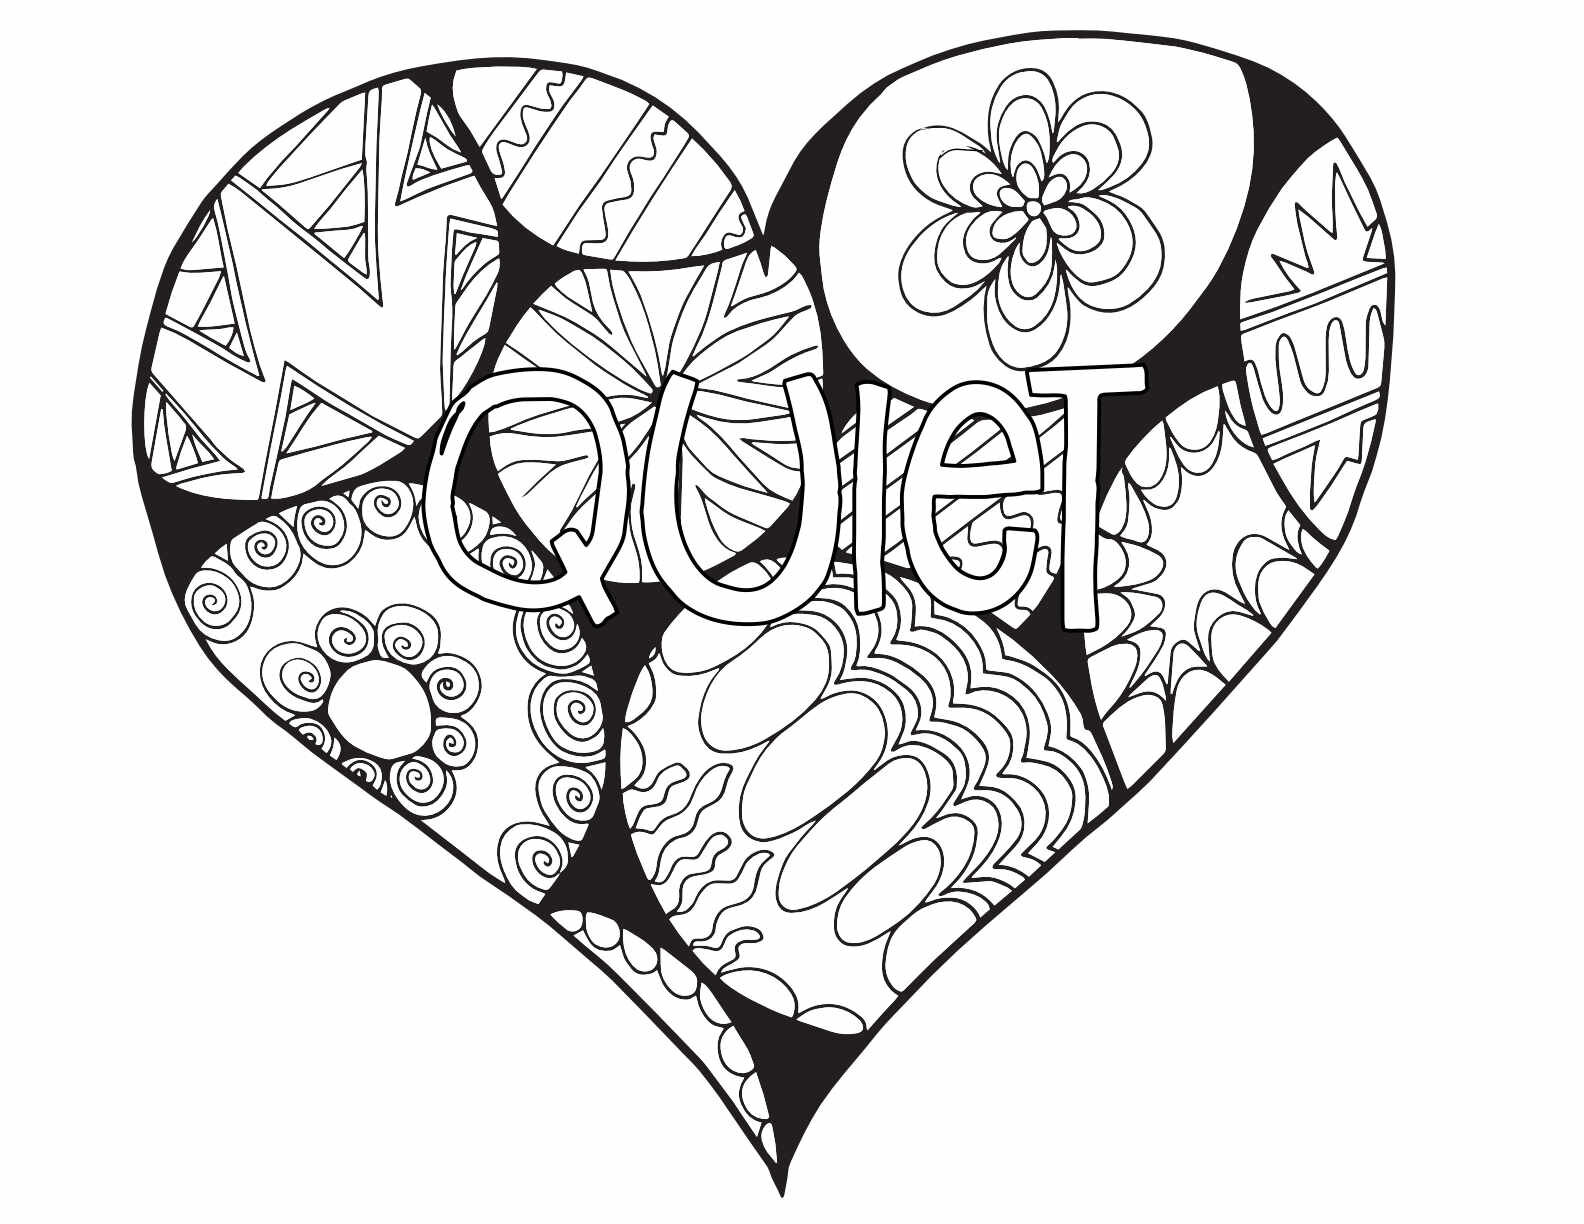 3 FREE QUIET PRINTABLE COLORING PAGES CLICK HERE TO DOWNLOAD THE PAGE ABOVE